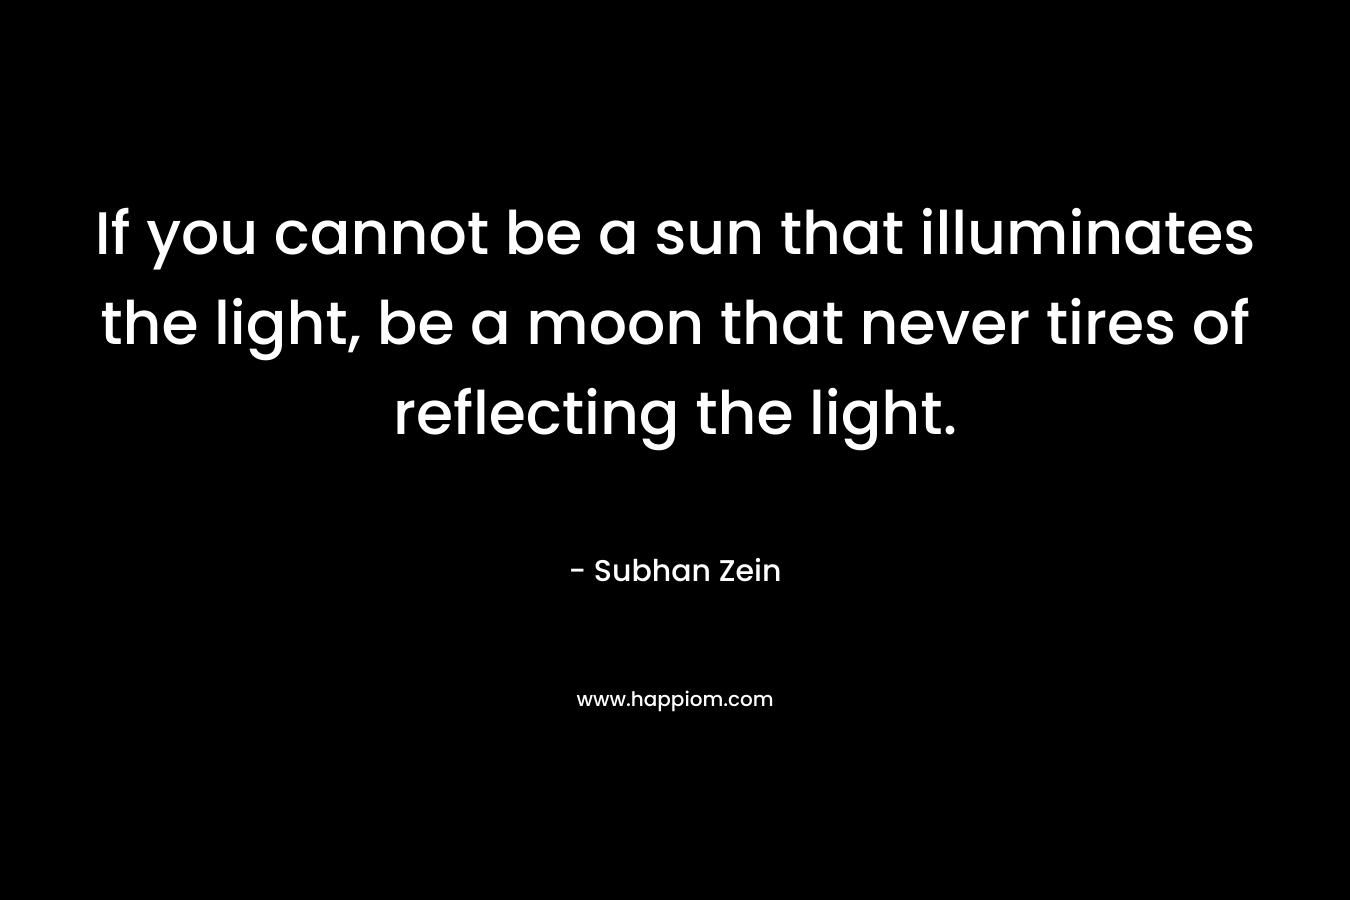 If you cannot be a sun that illuminates the light, be a moon that never tires of reflecting the light.